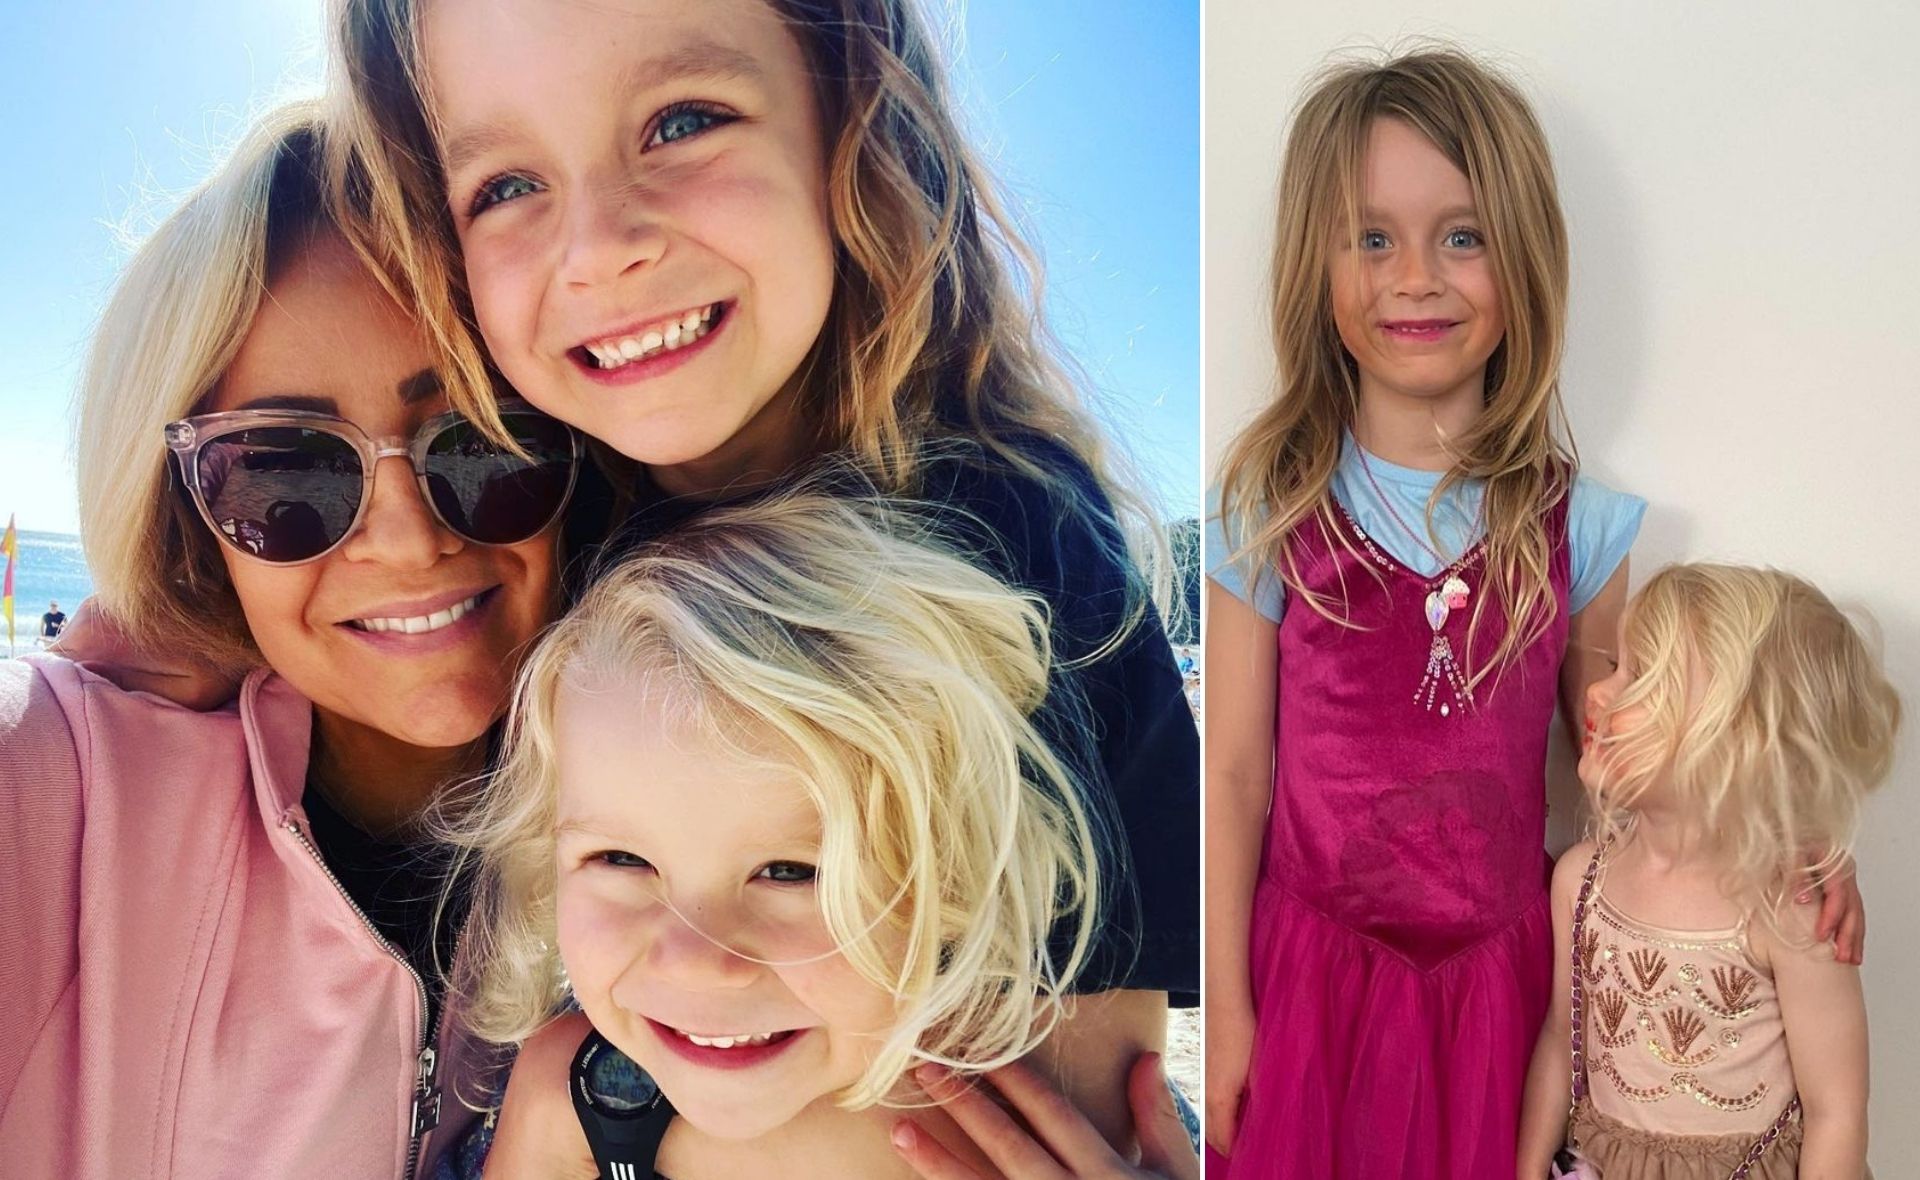 Carrie Bickmore’s daughters Evie and Adelaide just raided her makeup bag and the results are hilarious